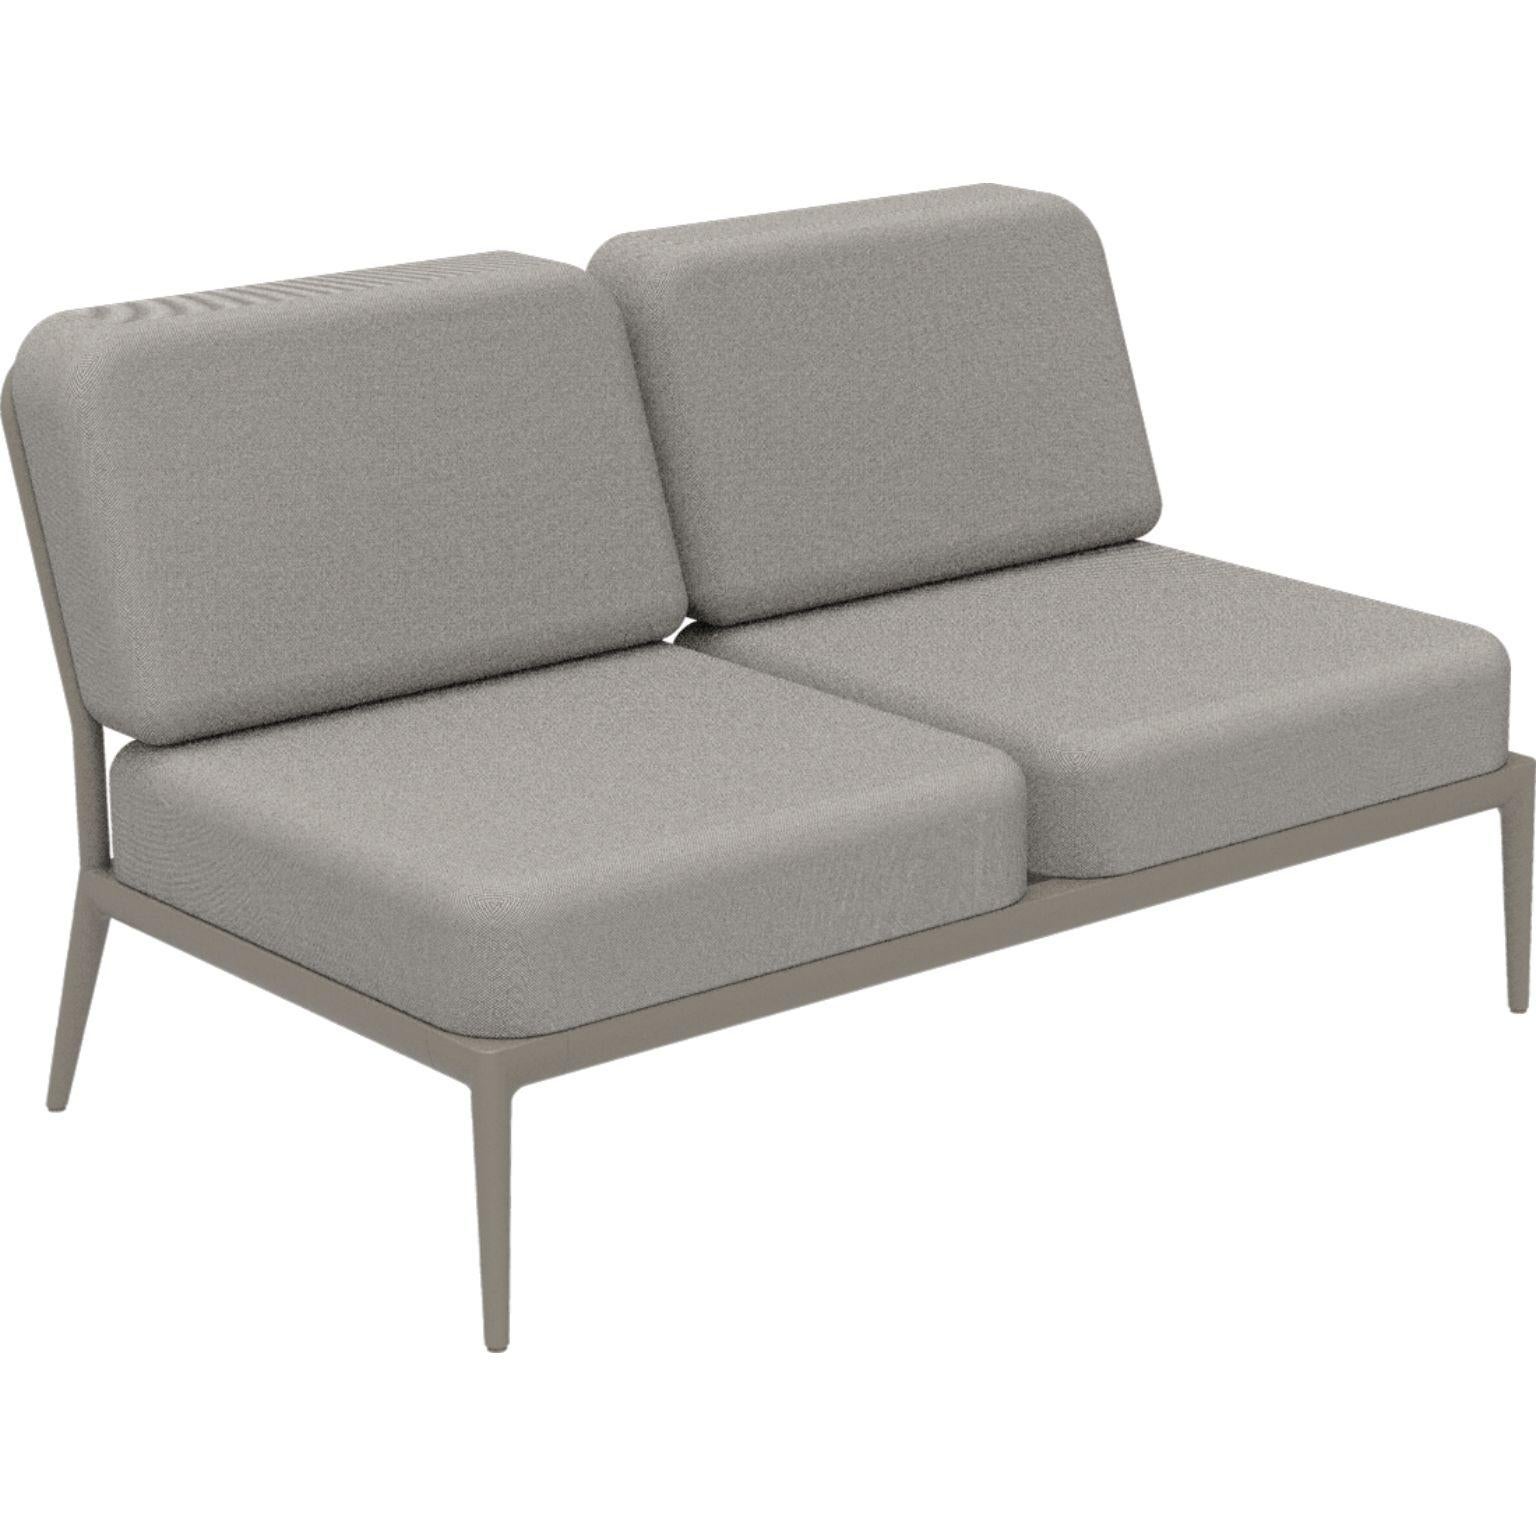 Nature cream double central modular sofa by MOWEE
Dimensions: D83 x W136 x H81 cm (seat height 42 cm).
Material: Aluminum and upholstery.
Weight: 27 kg.
Also available in different colors and finishes.

An unmistakable collection for its